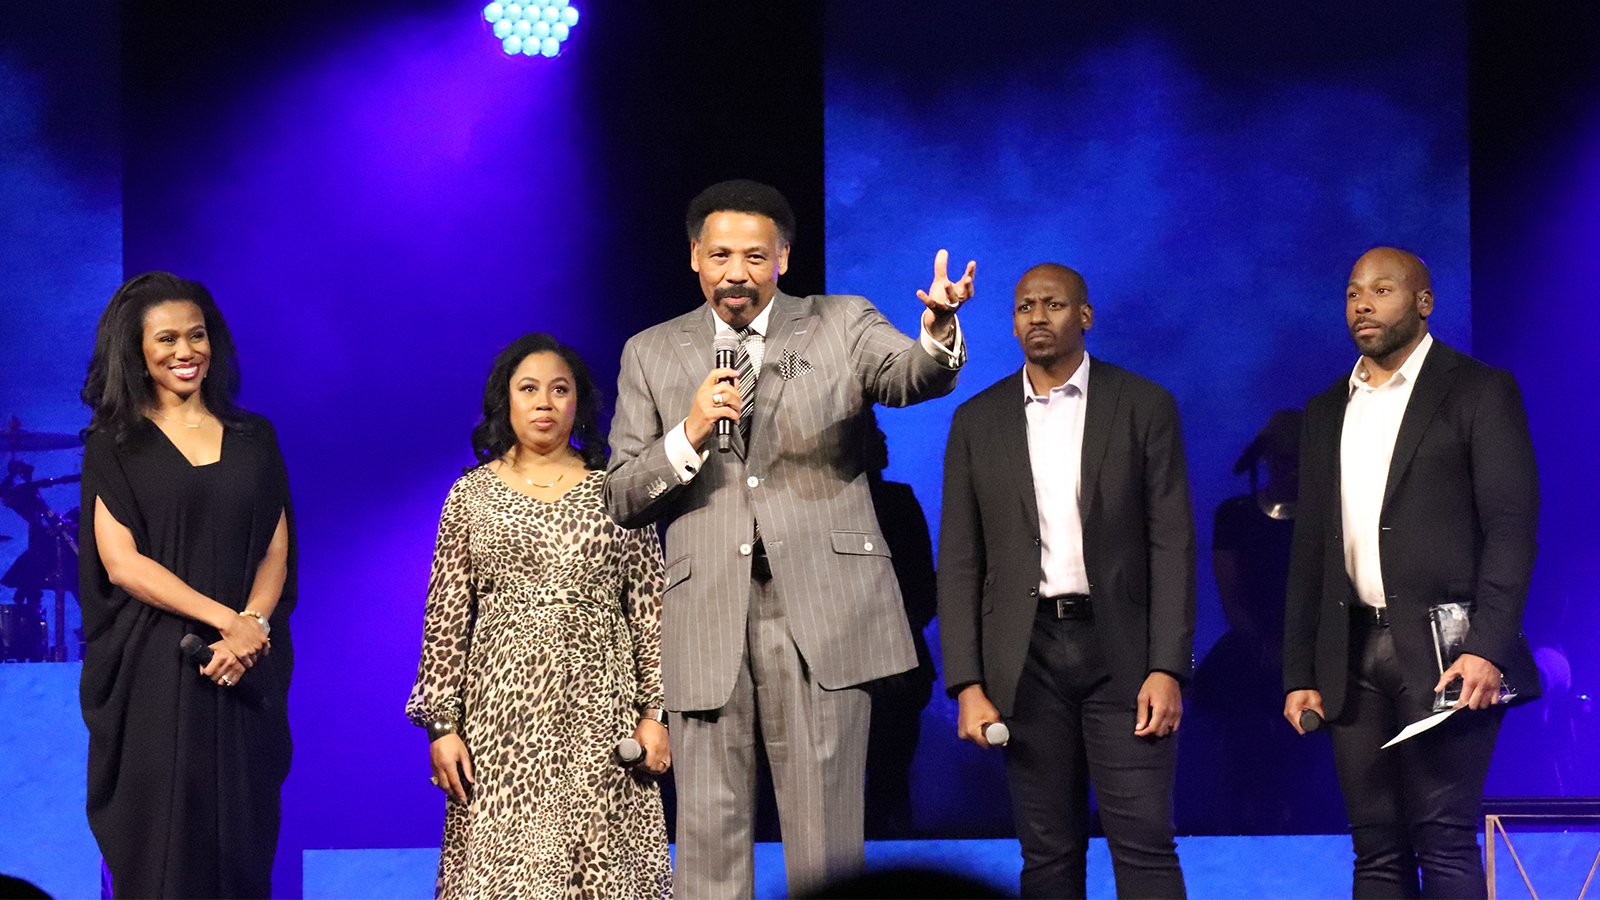 Pastor Tony Evans, center, speaks during the Kingdom Legacy Live event on Friday, Nov. 8, 2019, in Dallas. Evans’ children stand behind him. (Image RNS by Adelle M. Banks)